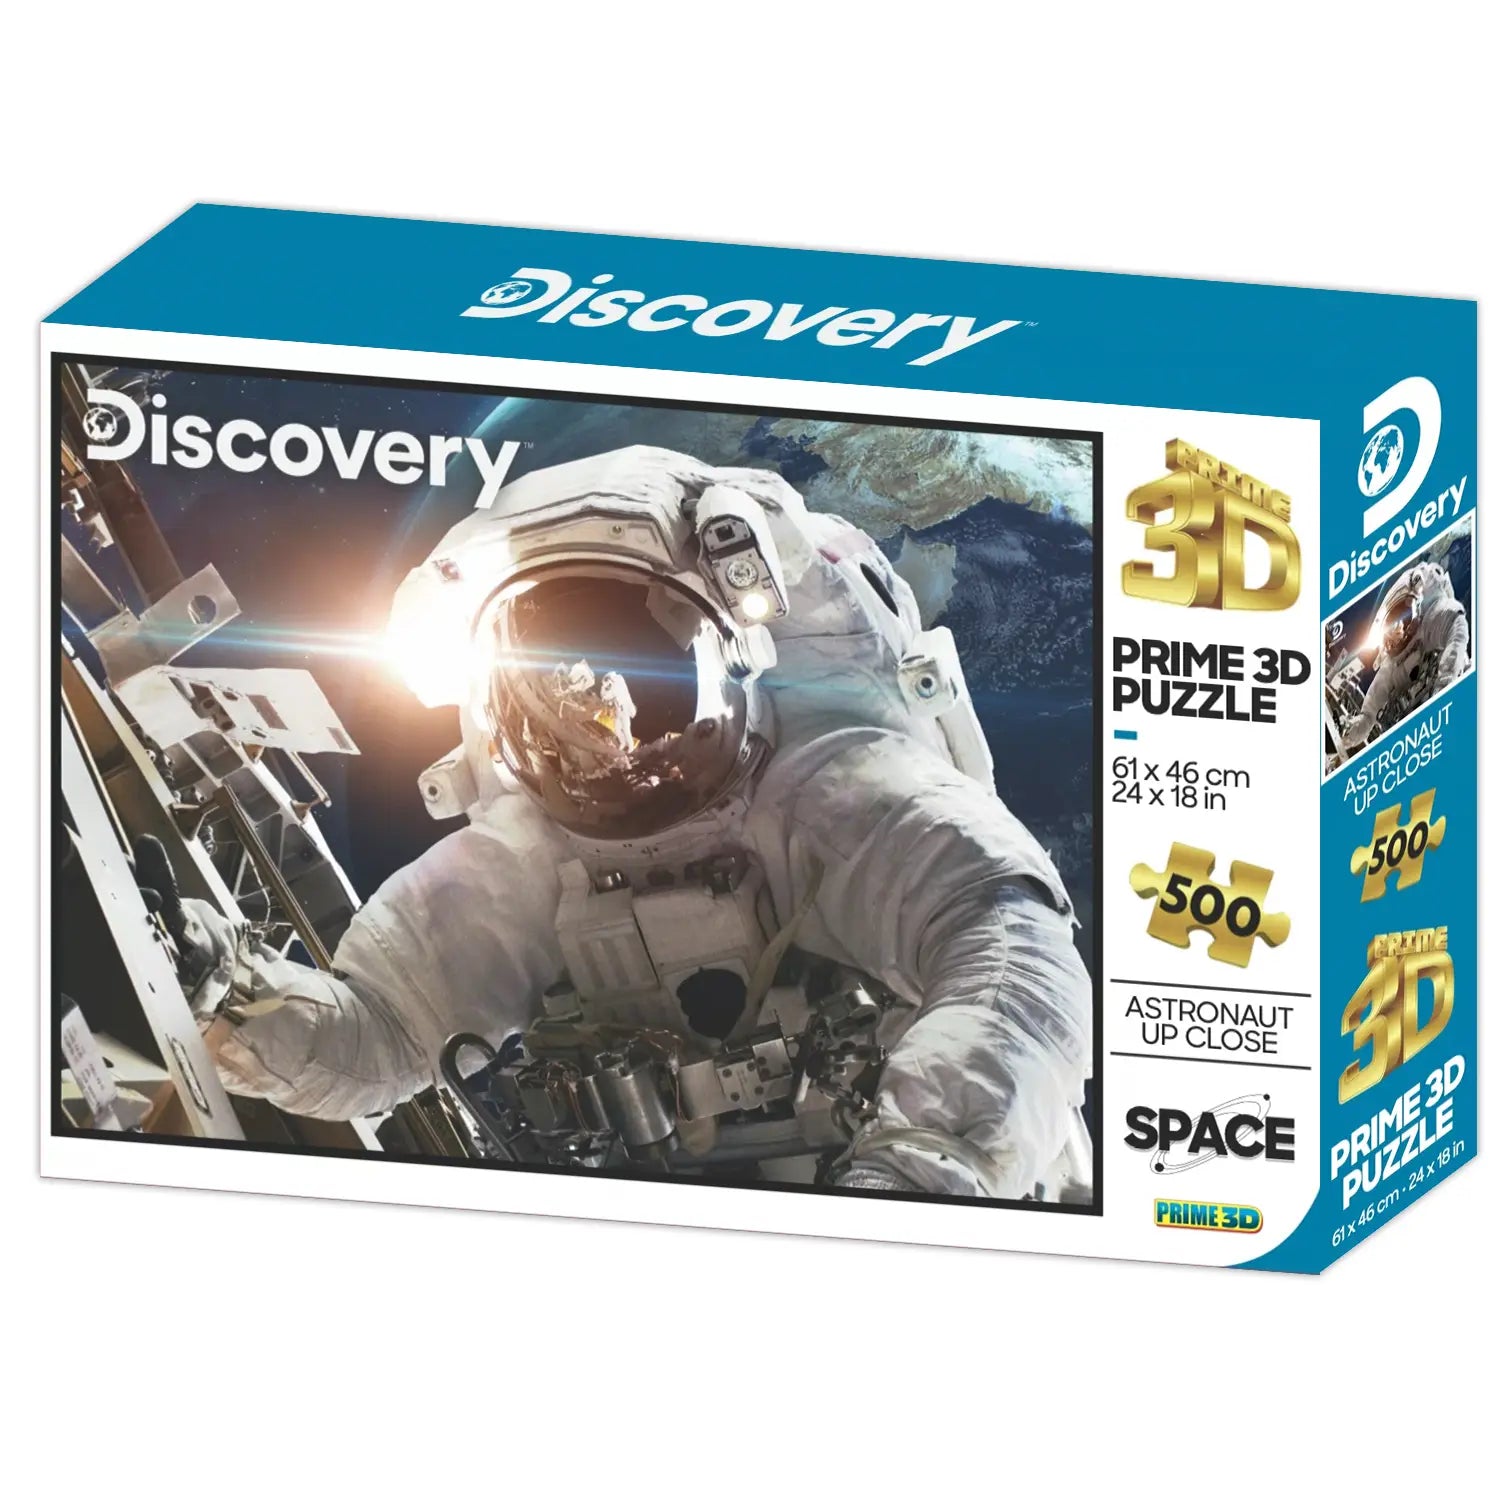 Prime 3D Discovery Astronaut Up Close 500 Piece Jigsaw Puzzle